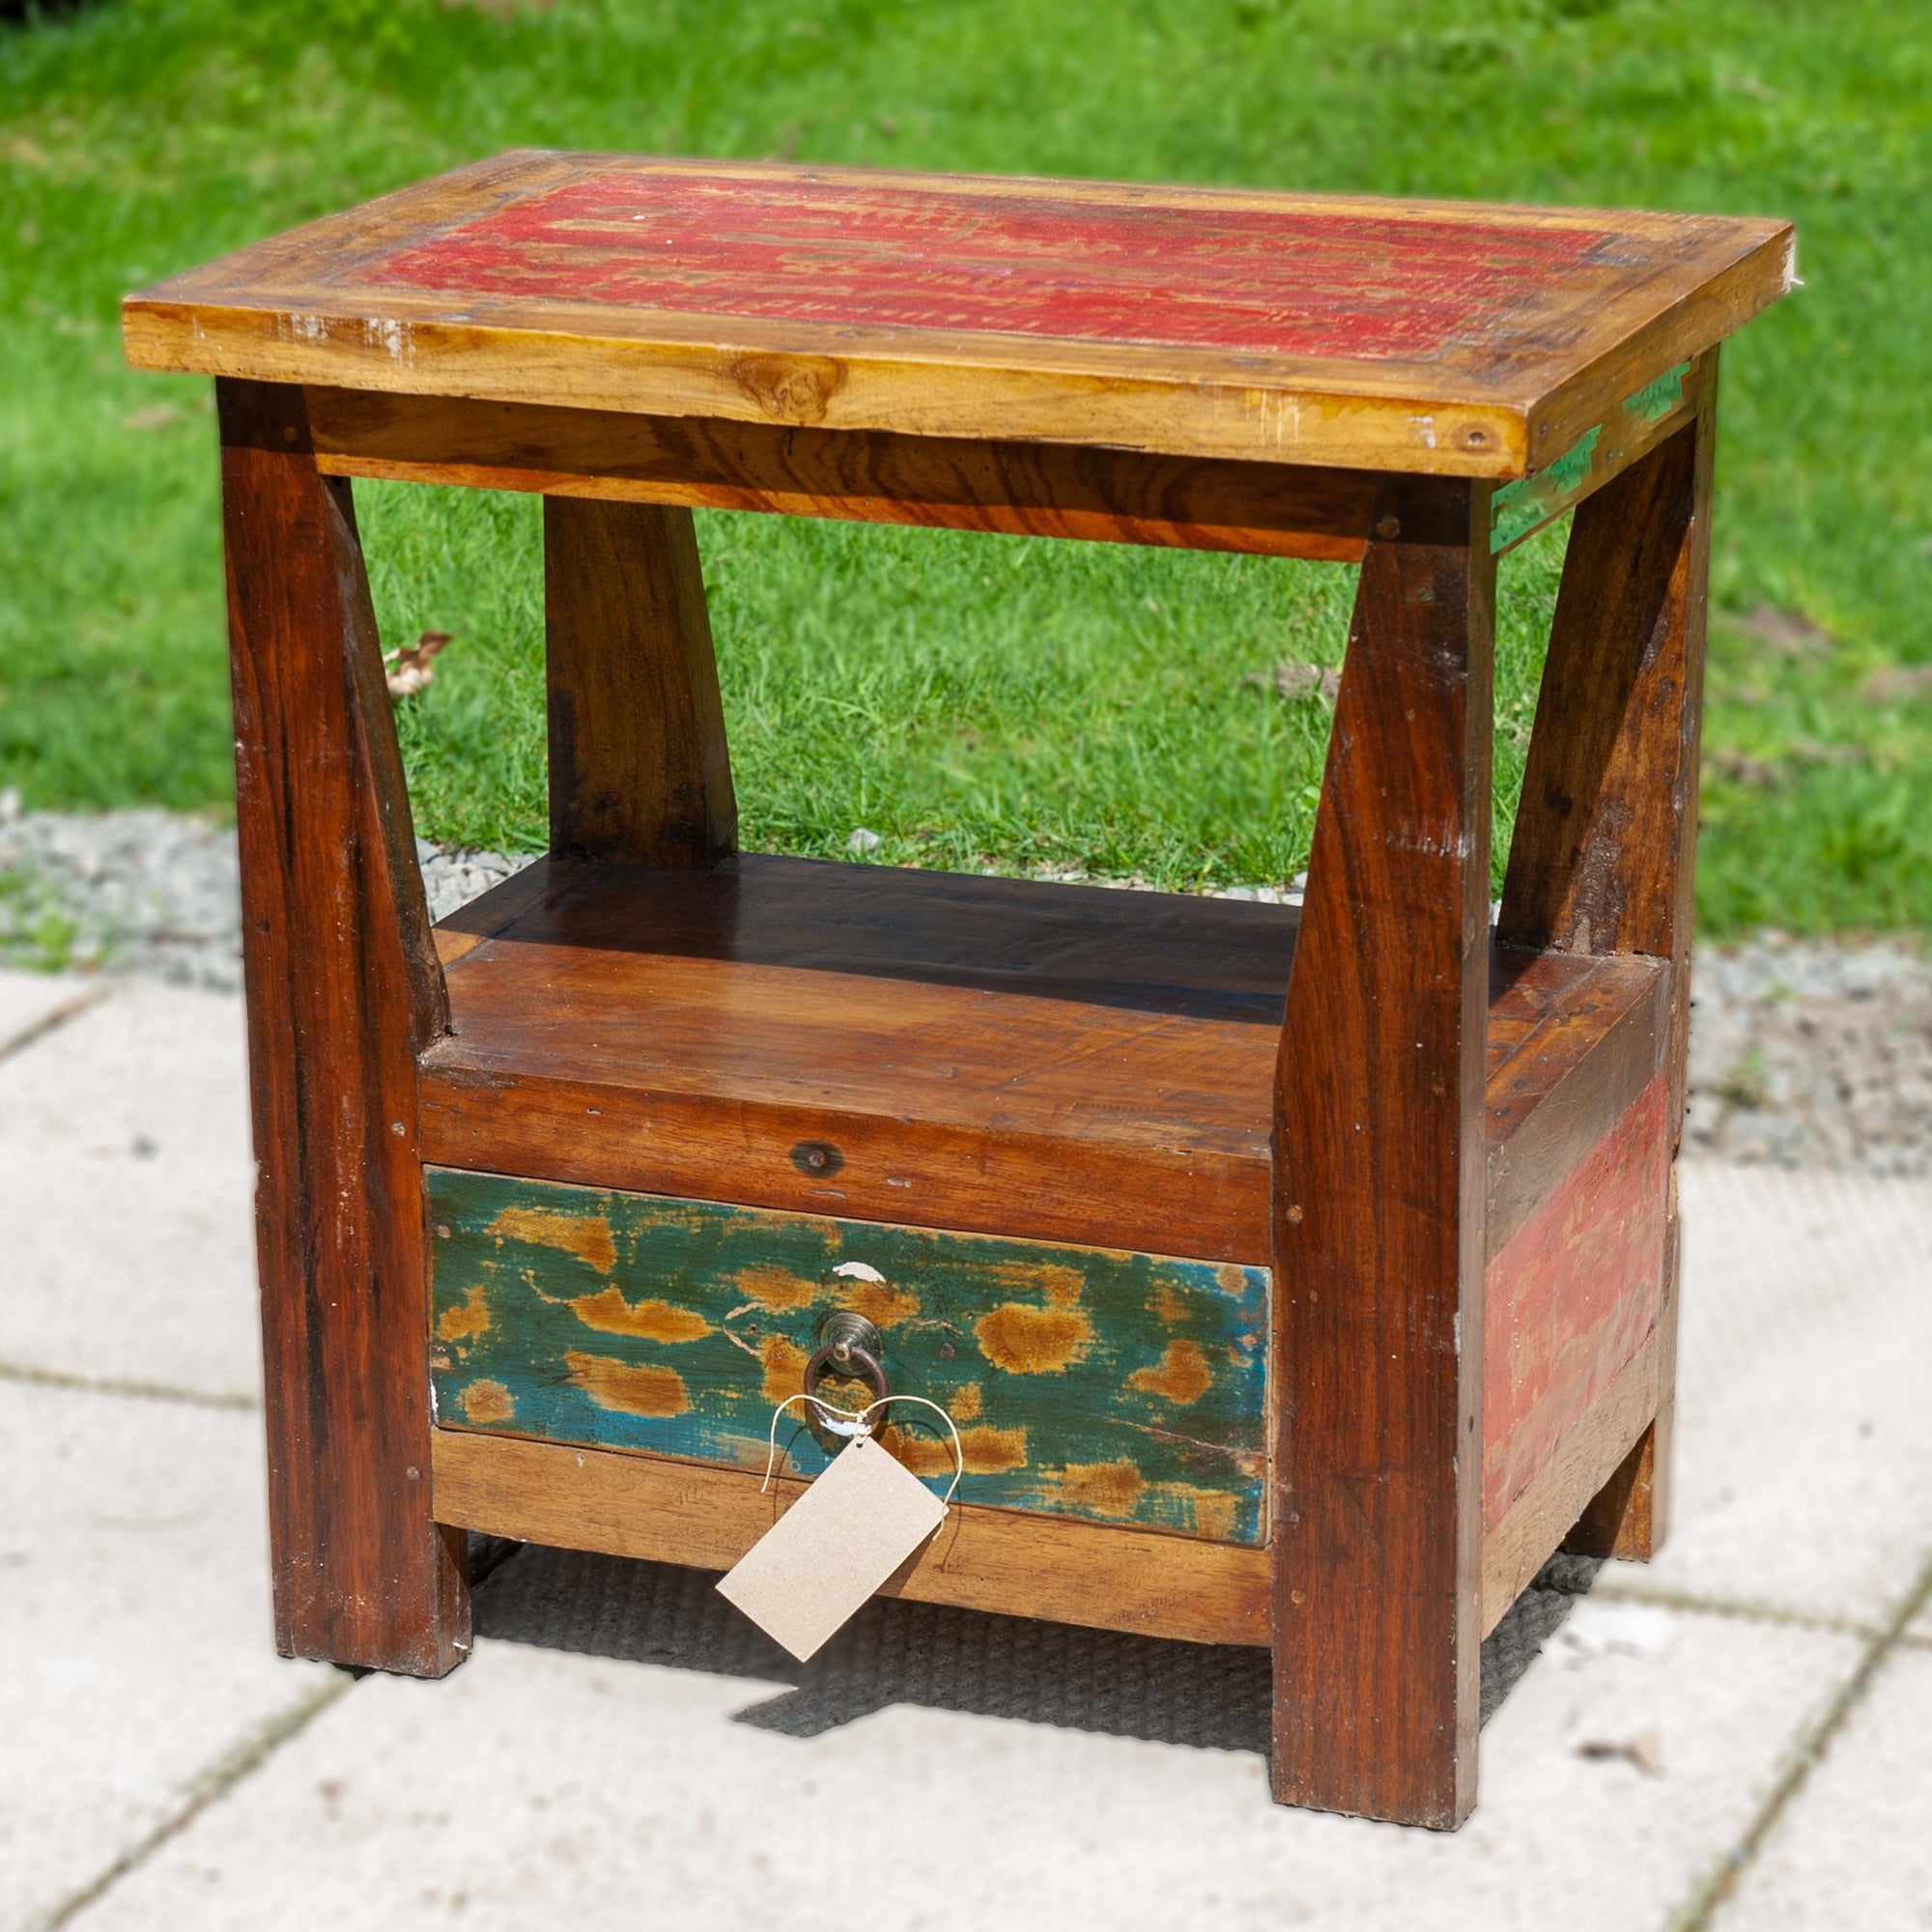 A funky reclaimed side table with open shelf and drawer and distressed red accent paint